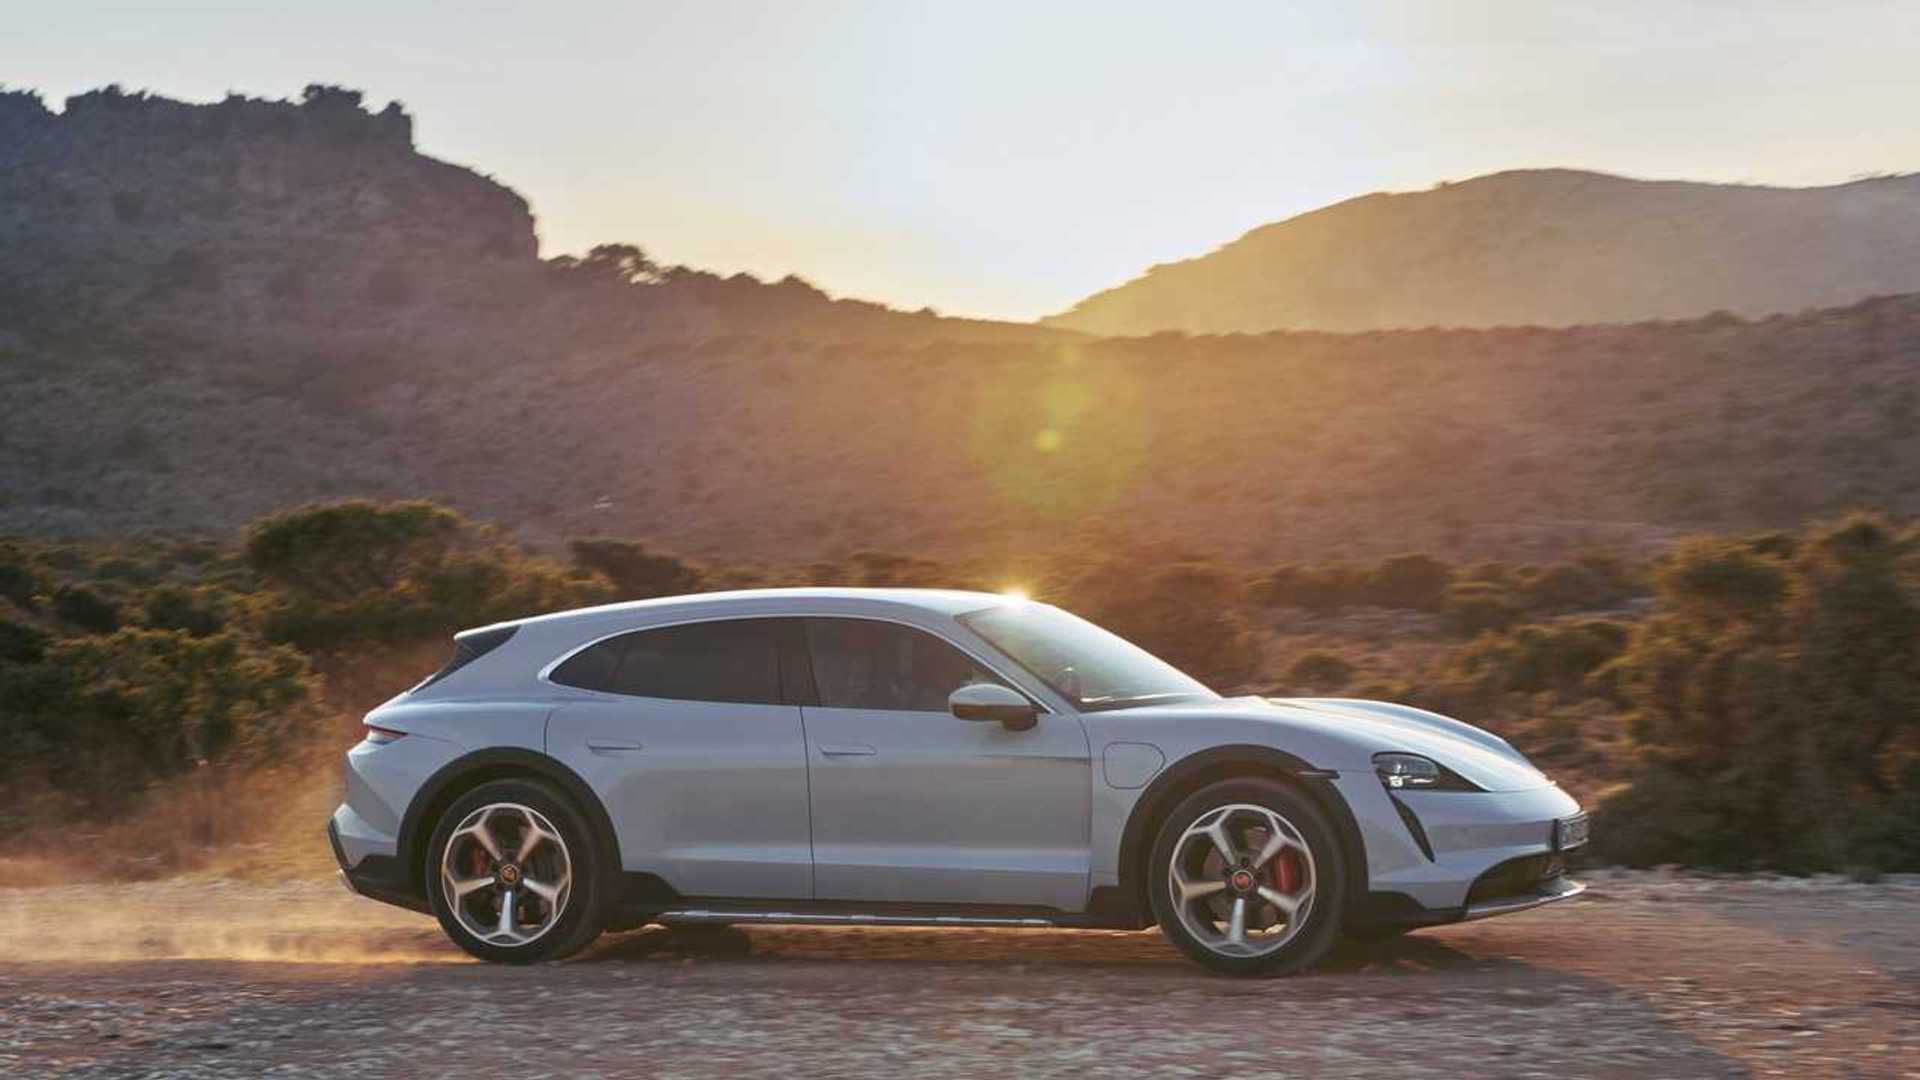 2021 Porsche Taycan Cross Turismo: The Electric Wagon Has Arrived